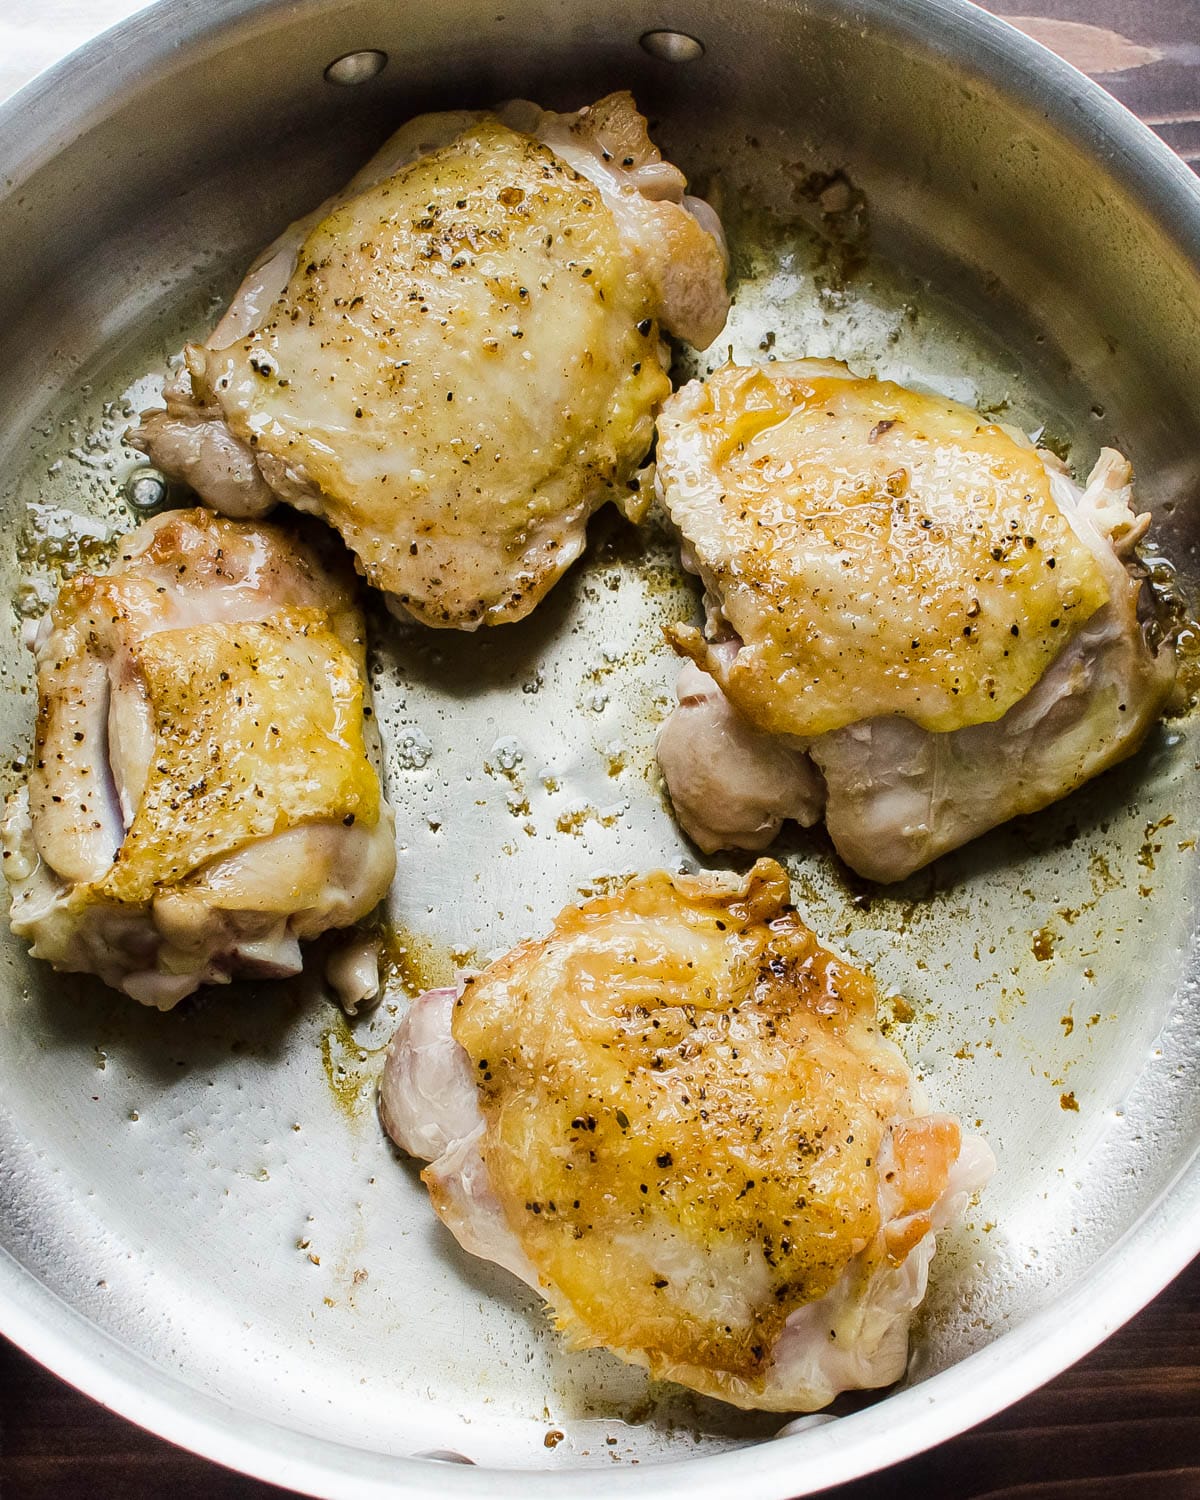 Searing the chicken in a hot skillet.